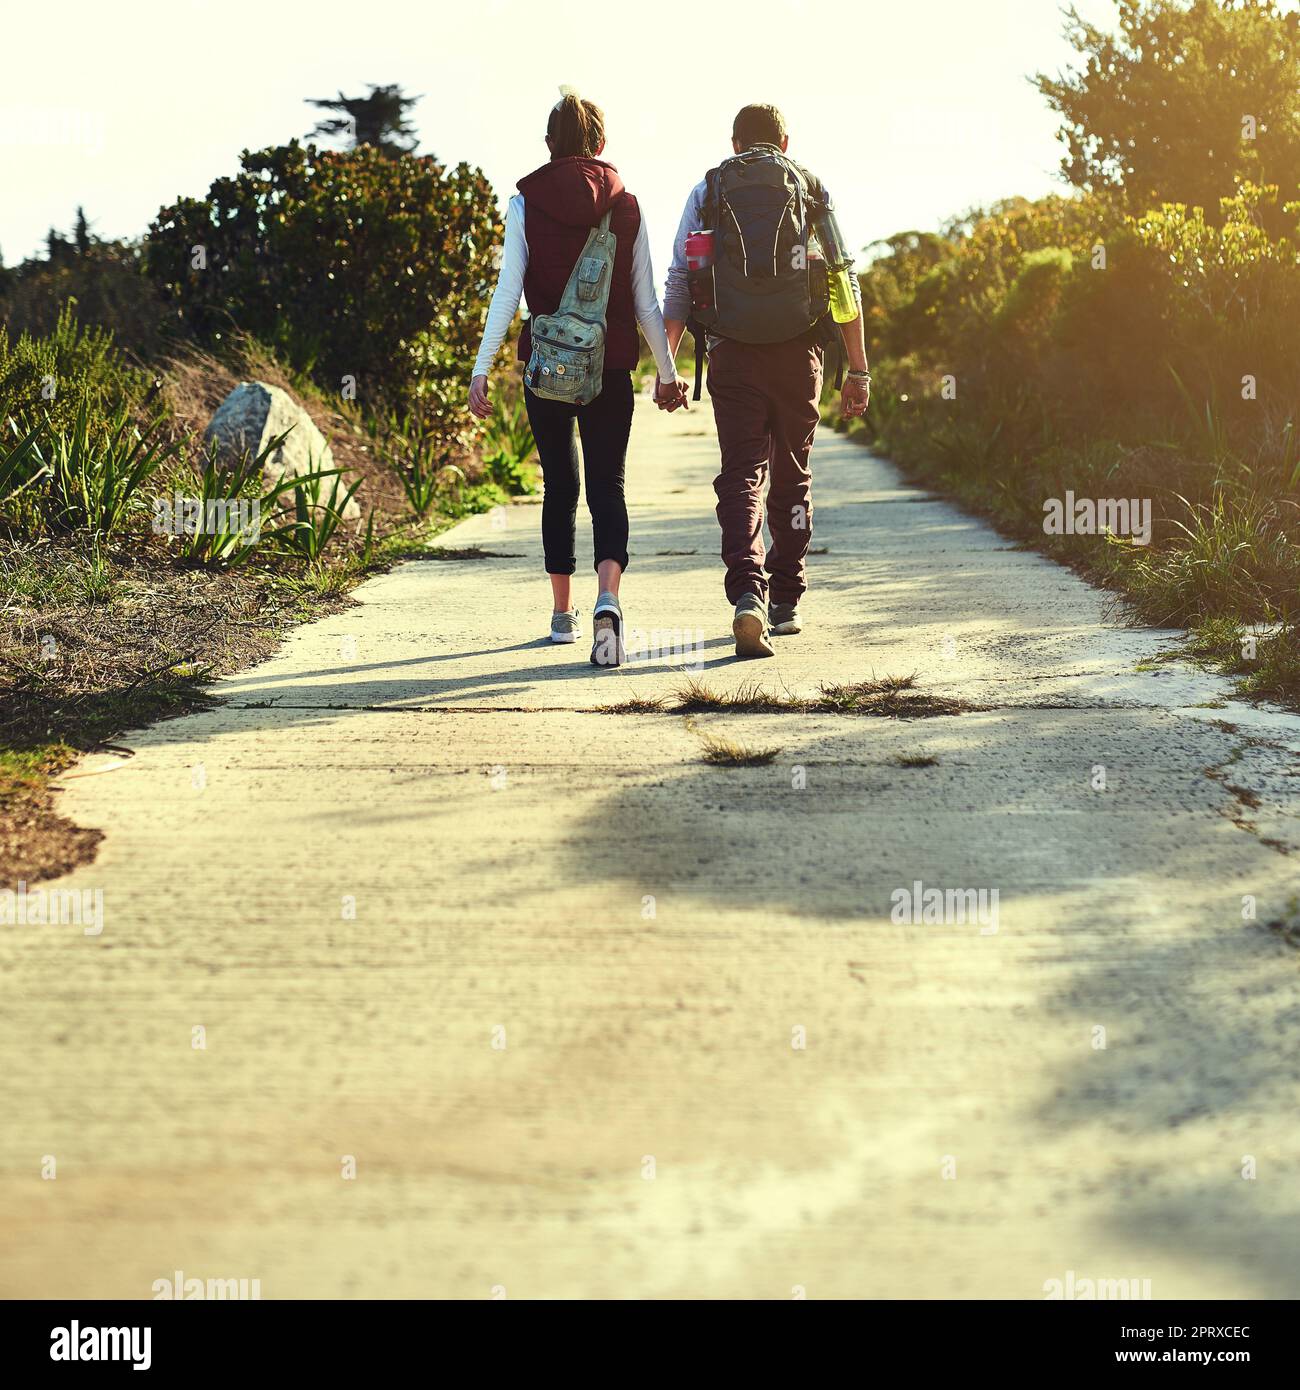 Not all who wander are lost. Rearview shot of a young couple holding hands while walking along a hiking path Stock Photo